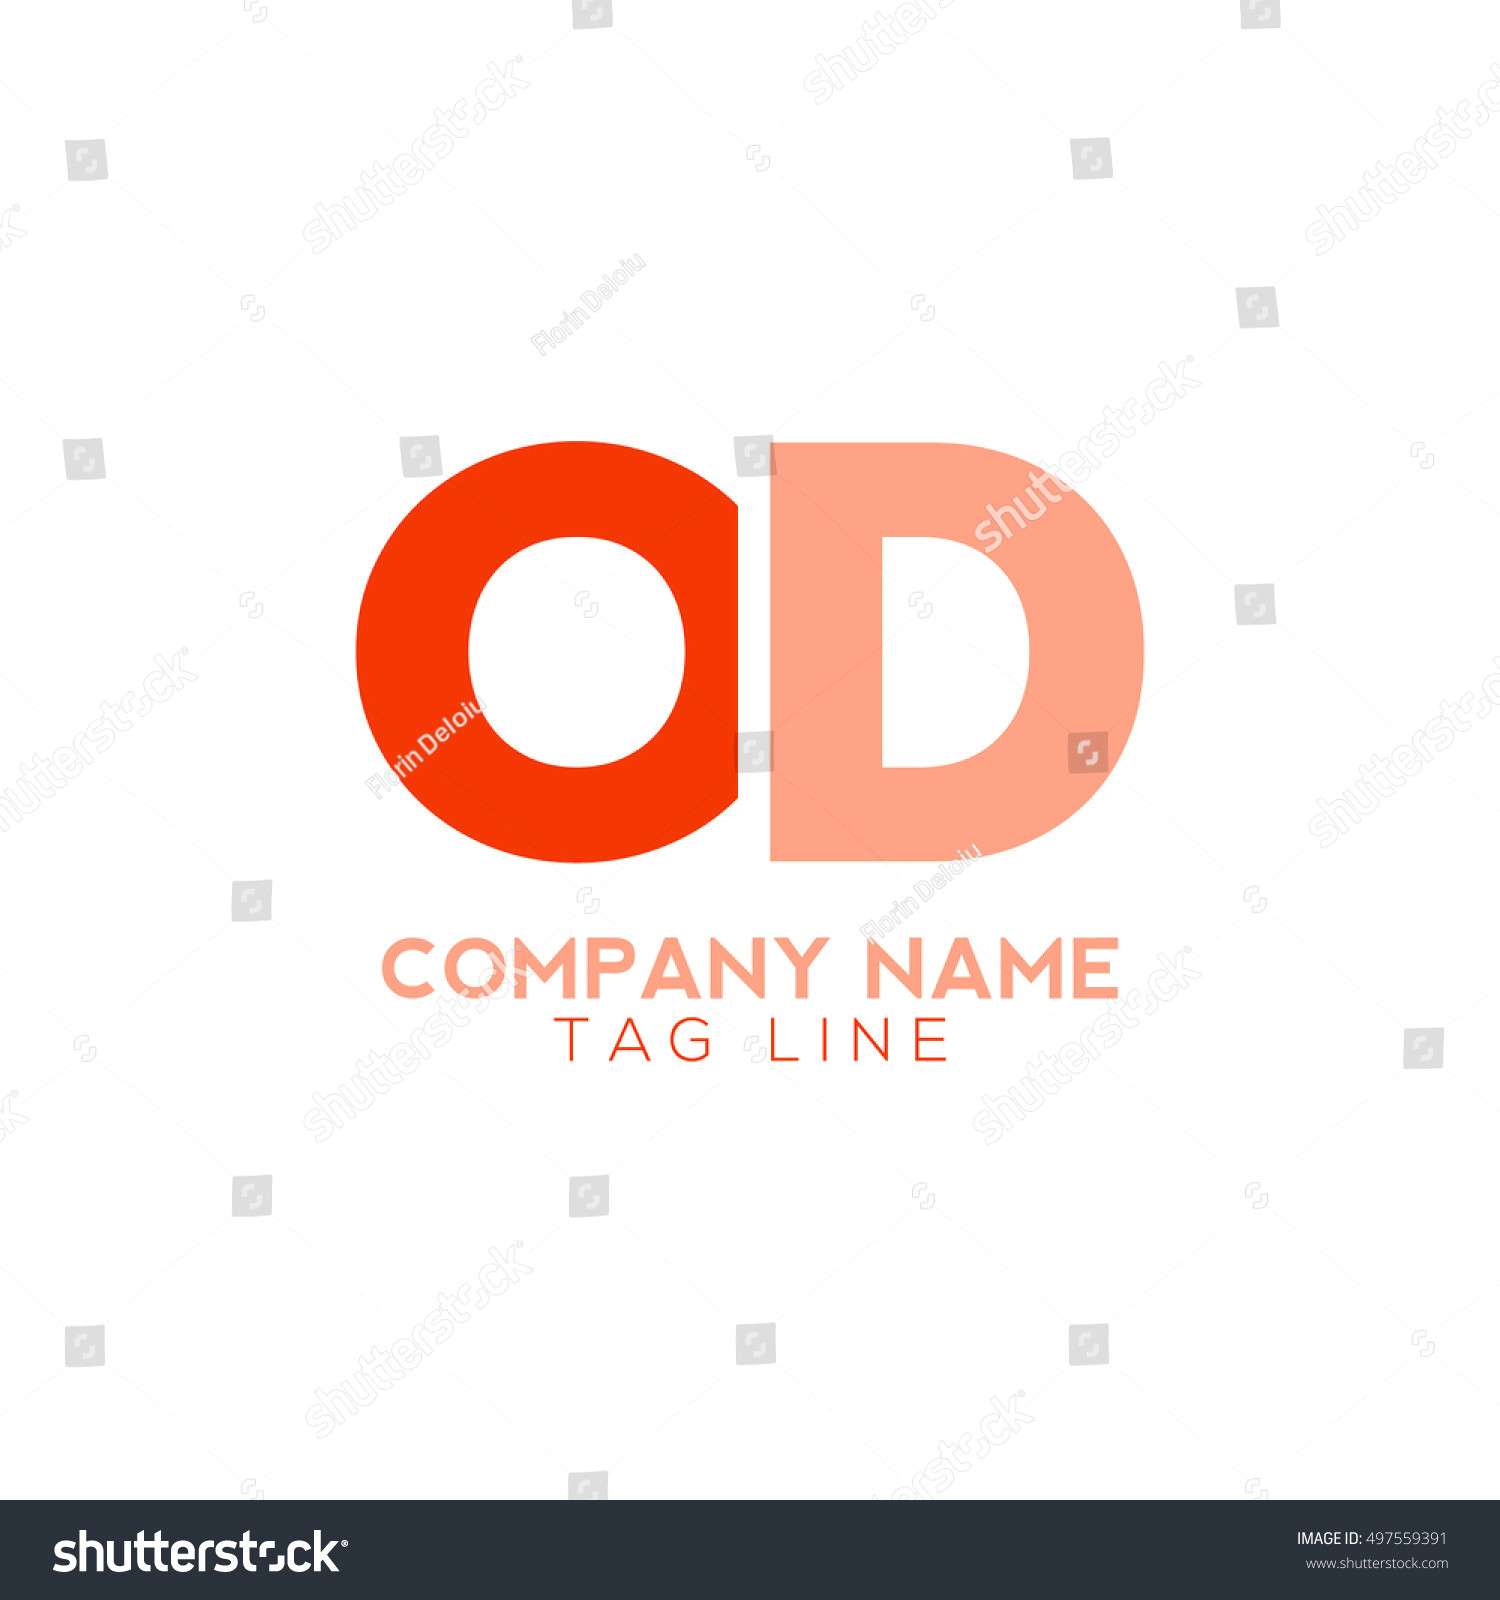 Easy Drawing Name Plate Cool Easy to Draw Logos Od Logo Stock Vector Shutterstock Prslide Com